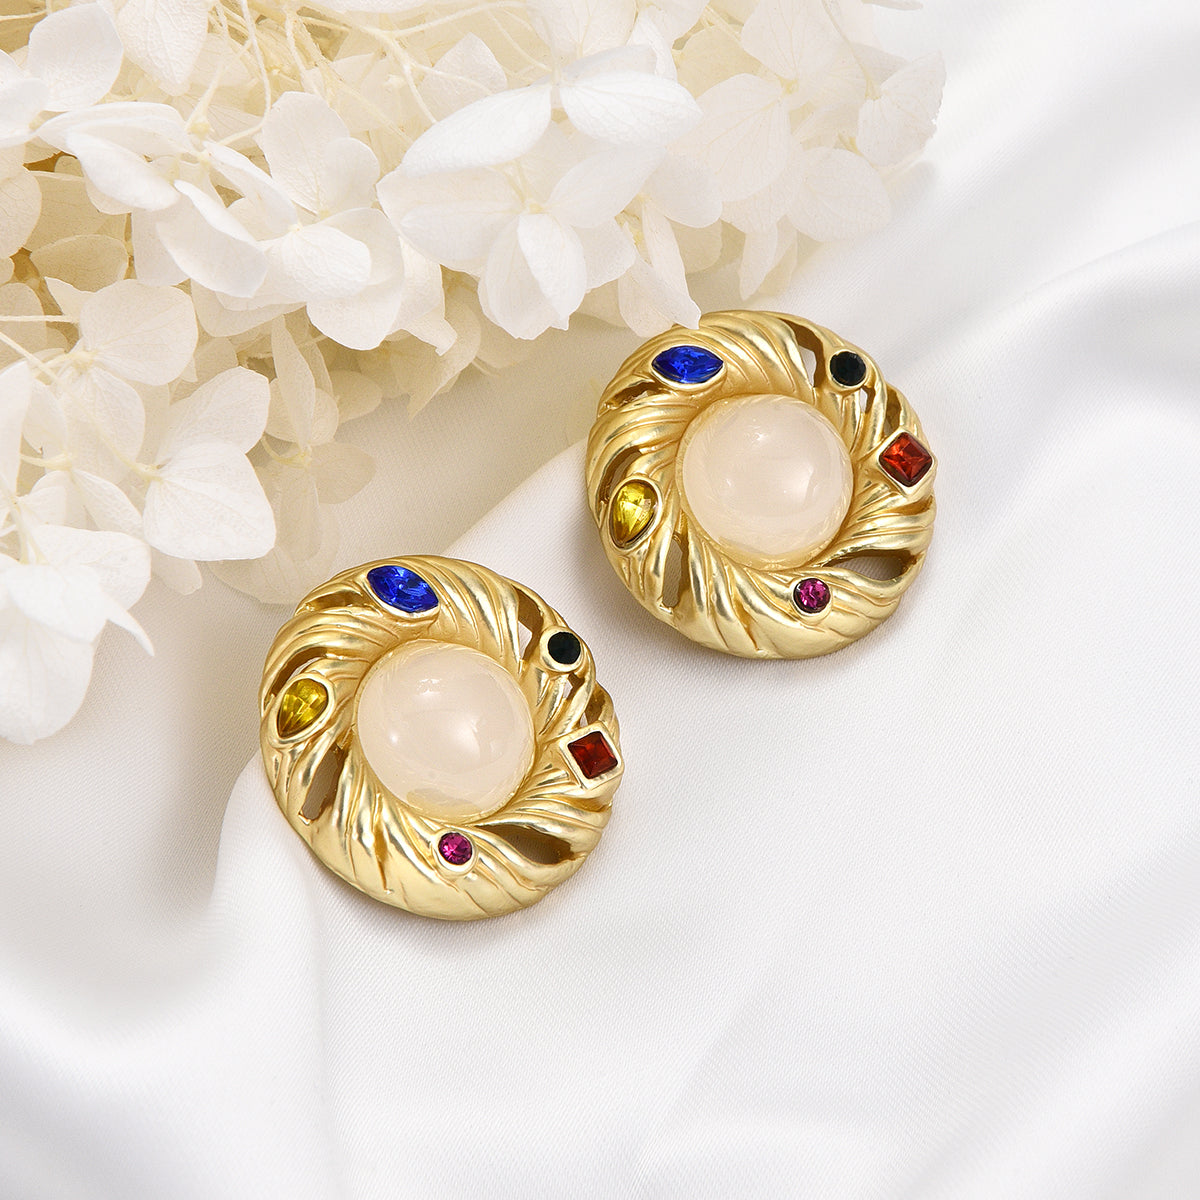 Ornate ivory mirror golden earrings with colorful jewels